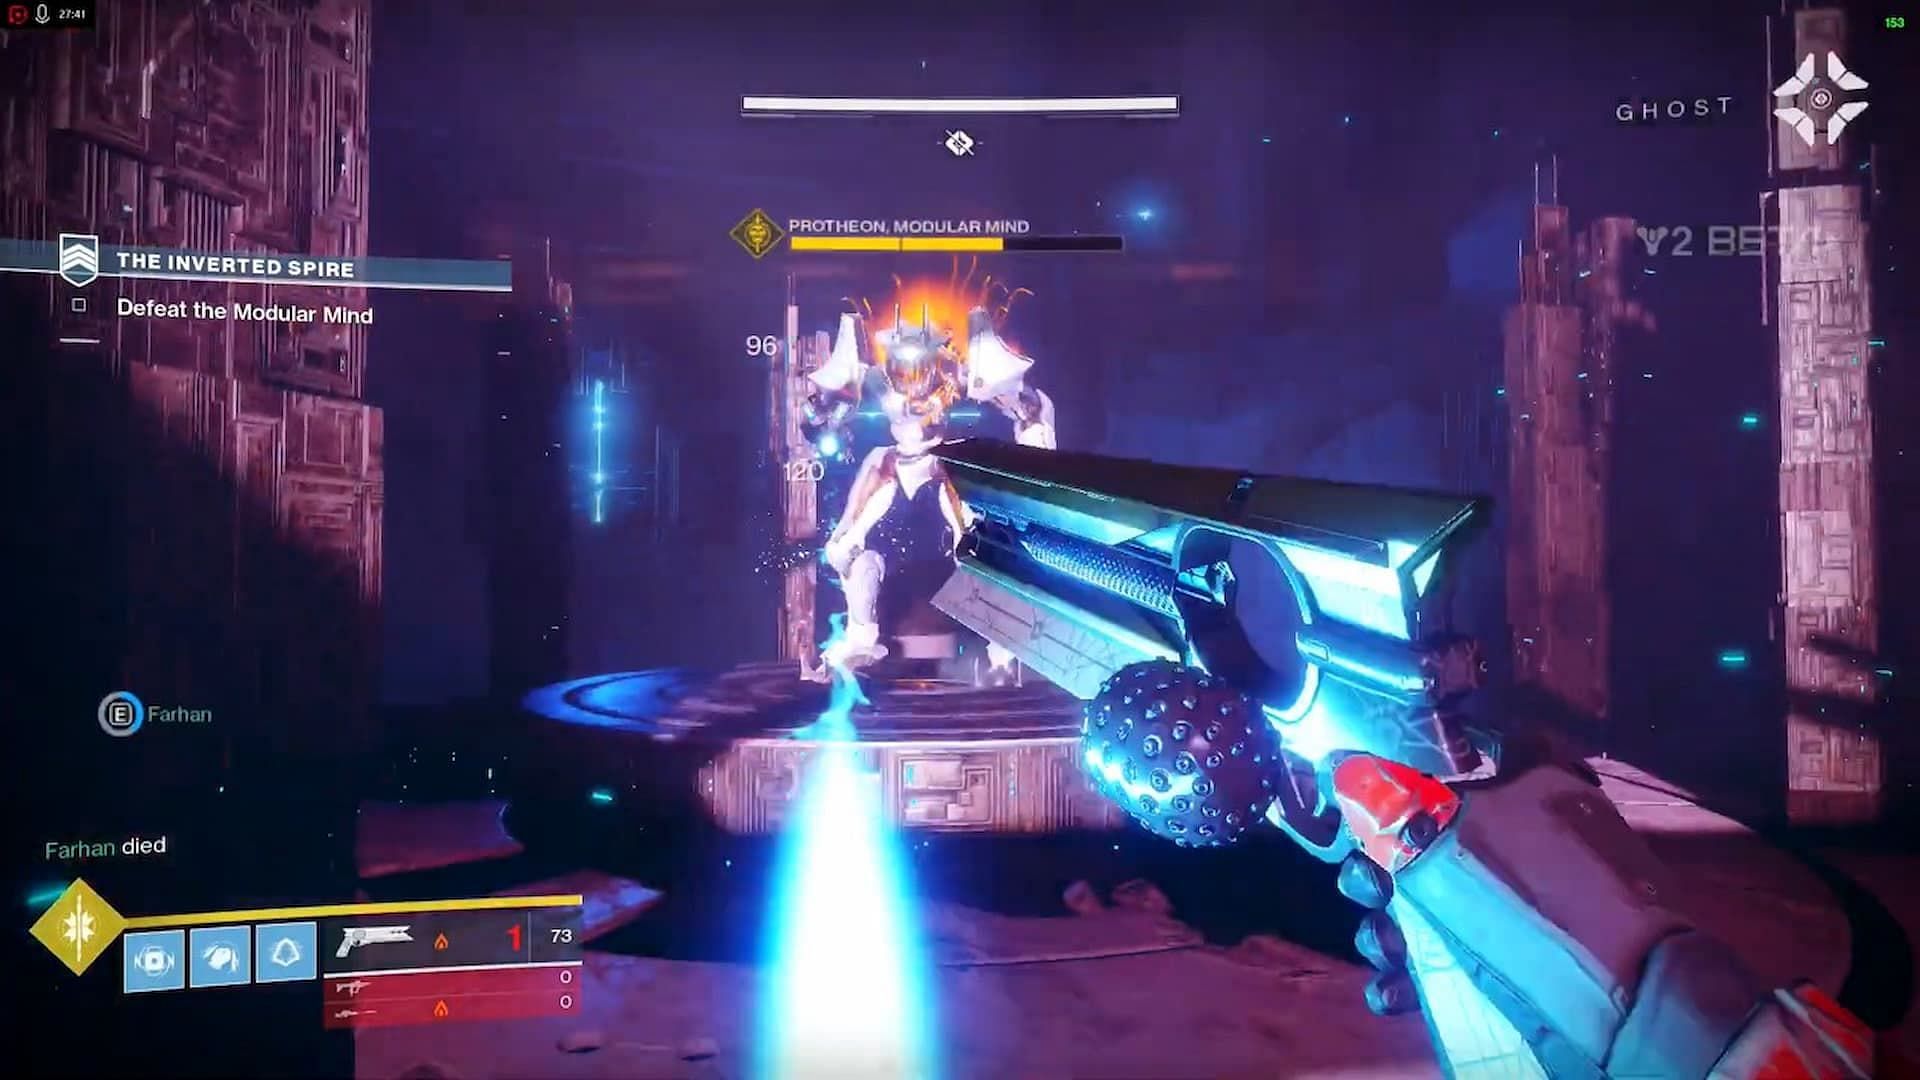 Strikes are a great way to earn Silver Leaves (Image via Bungie)